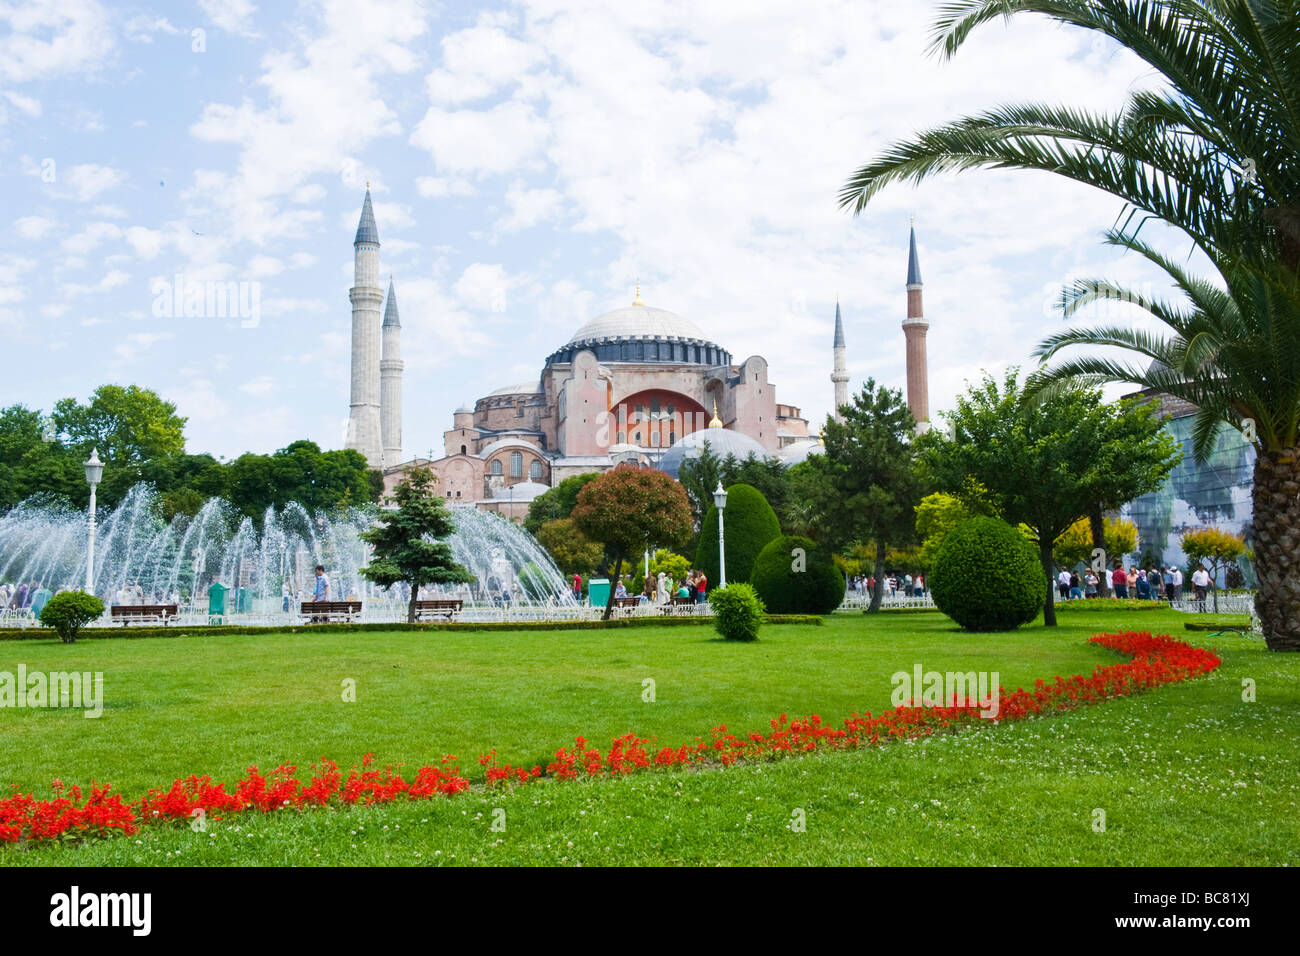 Turkey , Istanbul , The Blue Mosque or Sultan Ahmet Camii from Sultanahmet Square or Meydani , with gardens flowers & fountains Stock Photo